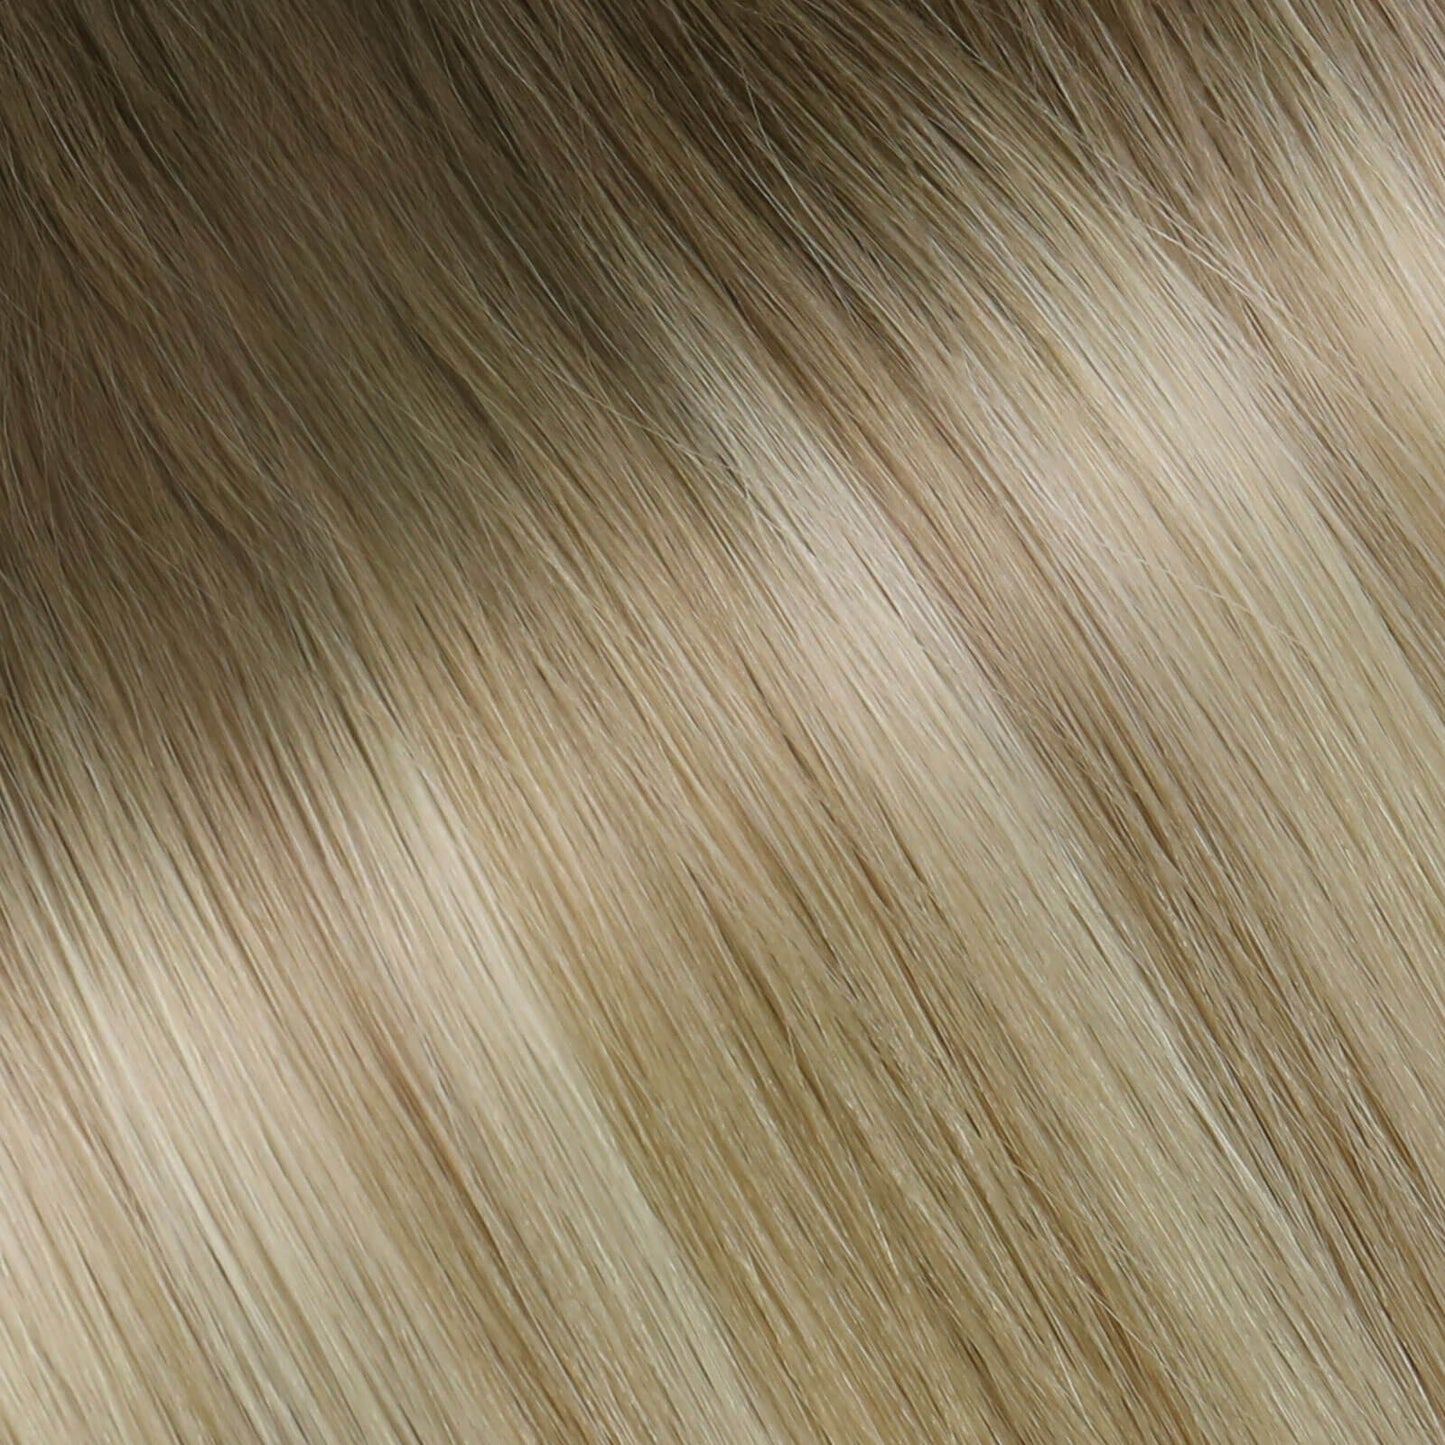 machine tied extensions professional weft hair extensions